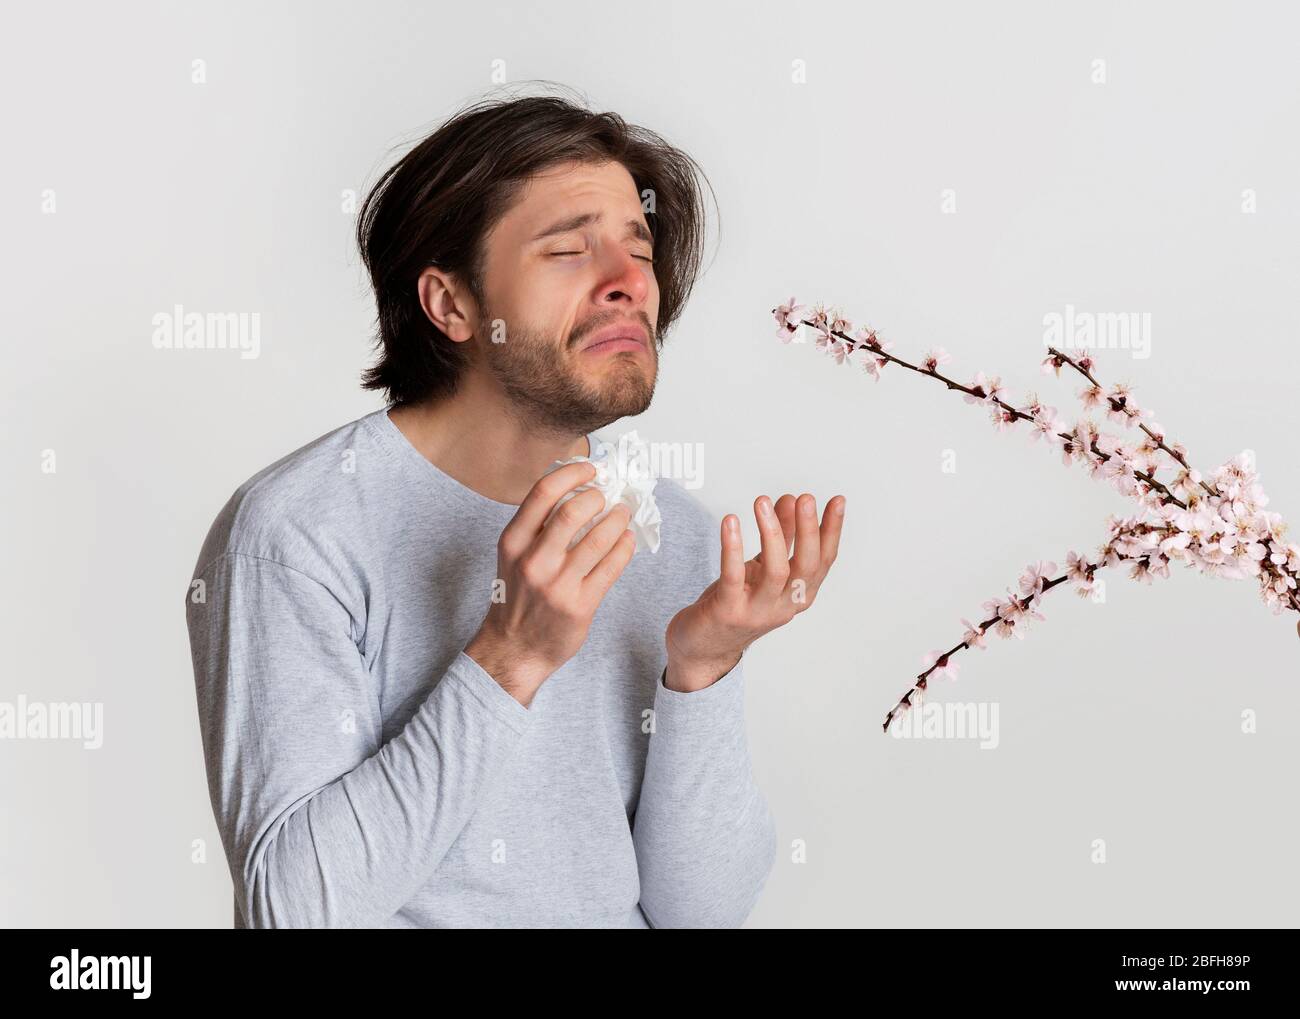 Man smelling flowers and suffer from allergies Stock Photo